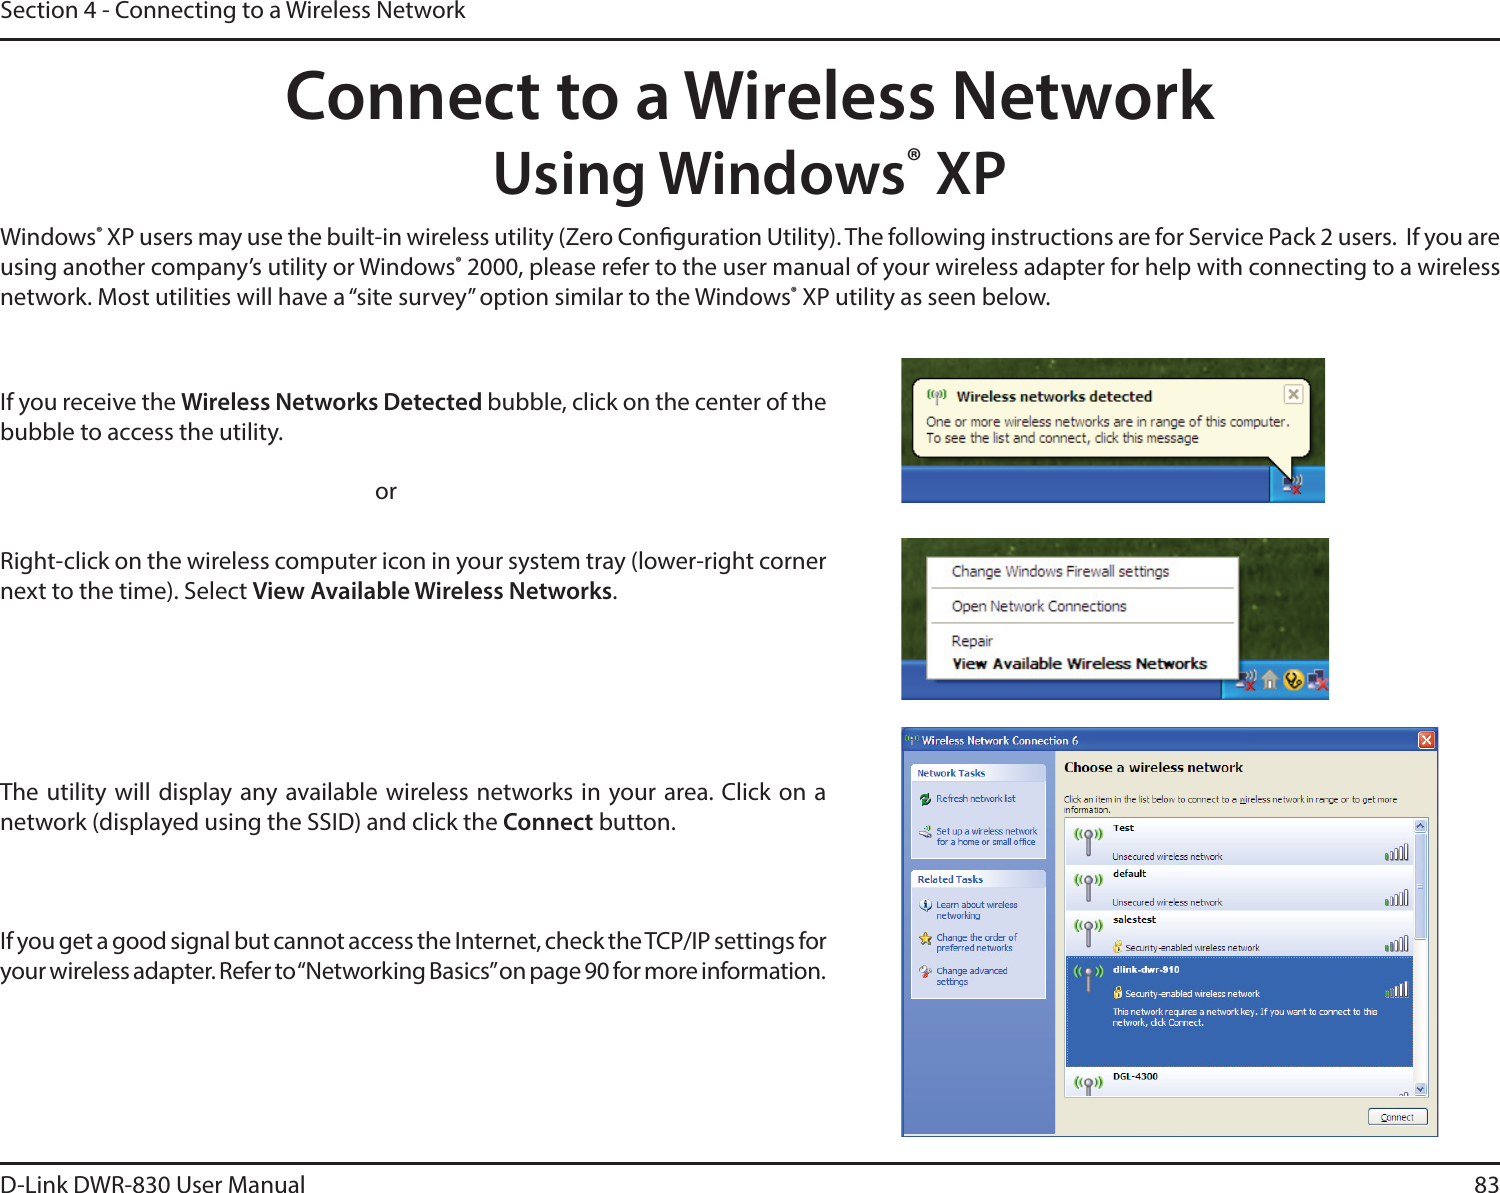 D-Link DWR-830 User Manual 83Section 4 - Connecting to a Wireless NetworkConnect to a Wireless NetworkUsing Windows® XPWindows® XP users may use the built-in wireless utility (Zero Conguration Utility). The following instructions are for Service Pack 2 users.  If you are using another company’s utility or Windows® 2000, please refer to the user manual of your wireless adapter for help with connecting to a wireless network. Most utilities will have a “site survey” option similar to the Windows® XP utility as seen below.Right-click on the wireless computer icon in your system tray (lower-right corner next to the time). Select View Available Wireless Networks.If you receive the Wireless Networks Detected bubble, click on the center of the bubble to access the utility.     orThe utility will display any available wireless networks in your area. Click on a network (displayed using the SSID) and click the Connect button.If you get a good signal but cannot access the Internet, check the TCP/IP settings for your wireless adapter. Refer to “Networking Basics” on page 90 for more information.